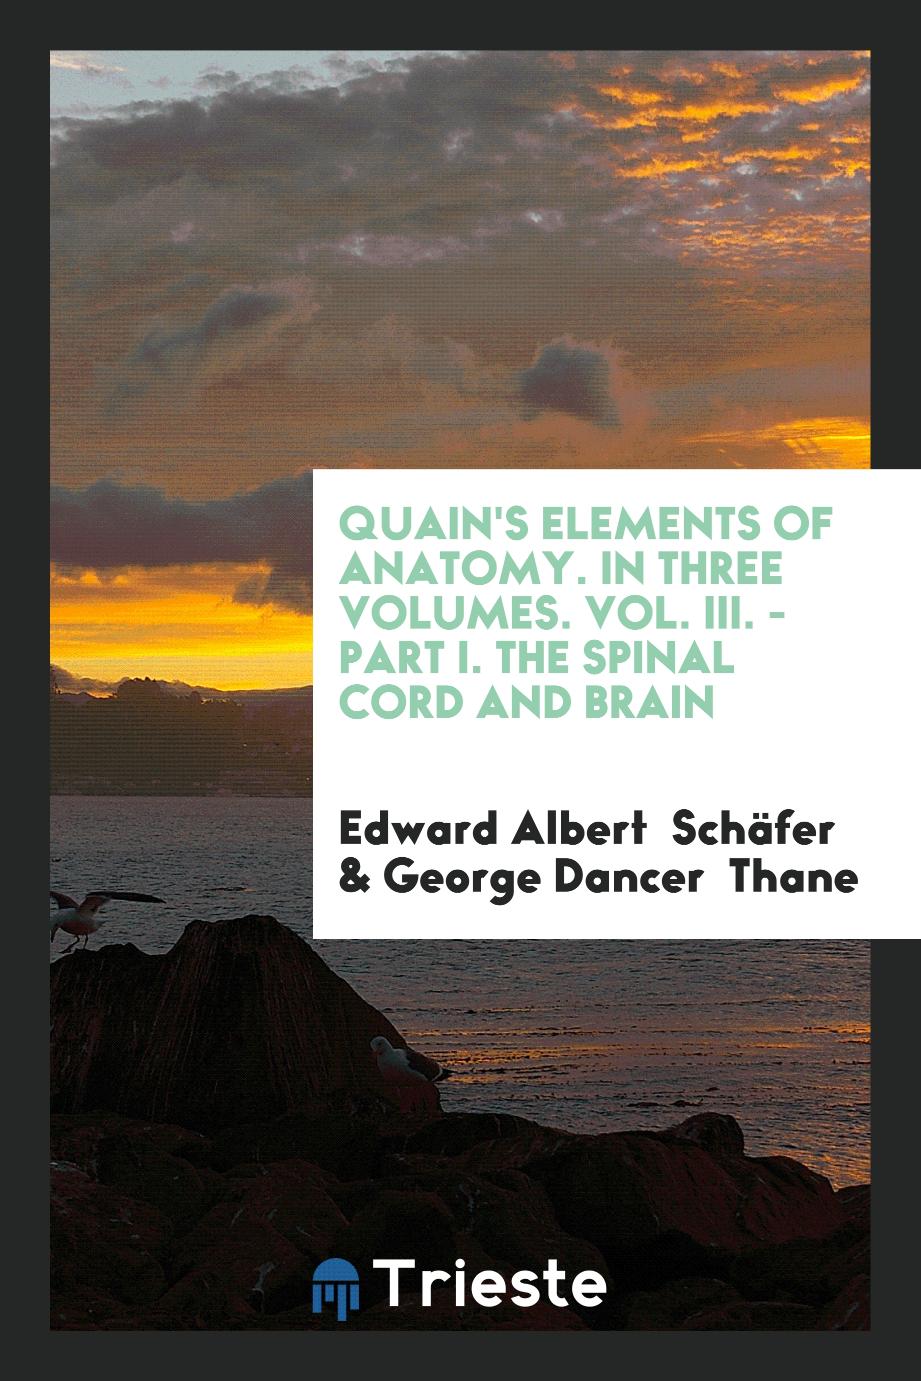 Quain's Elements of Anatomy. In Three Volumes. Vol. III. - Part I. The Spinal Cord and Brain